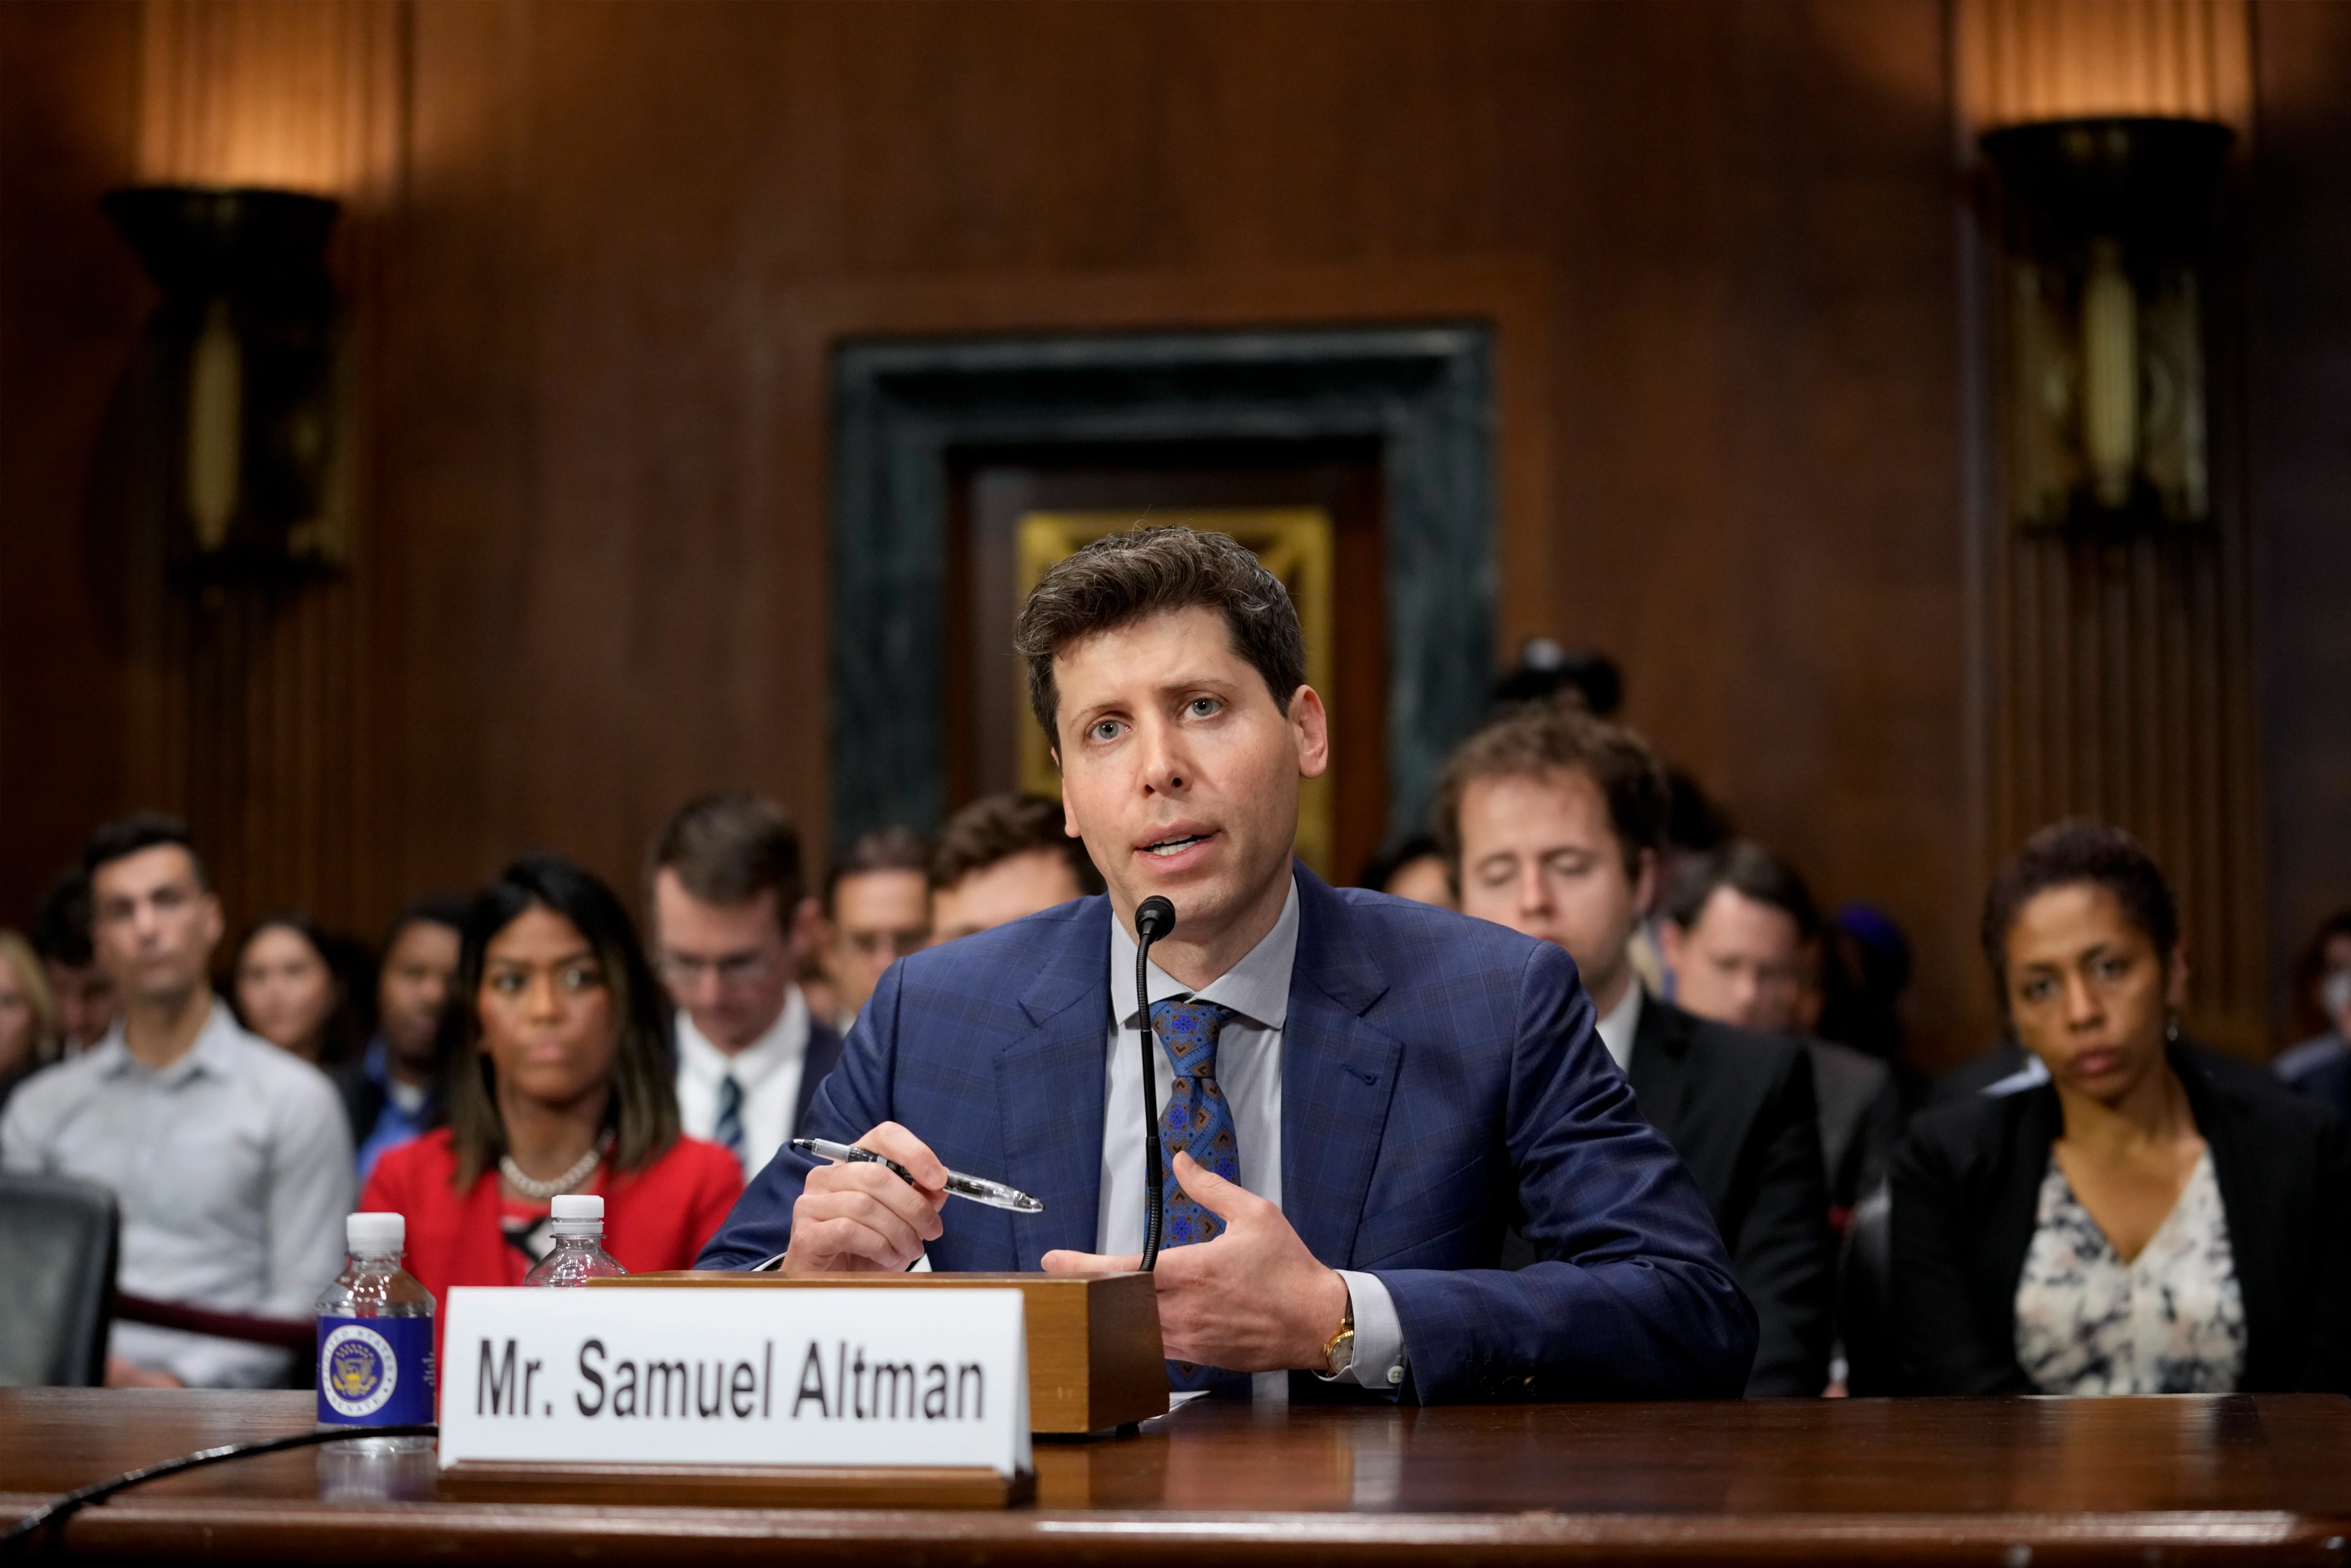 A man in a suit speaks at a hearing, people behind him, "Mr. Samuel Altman" sign in front.